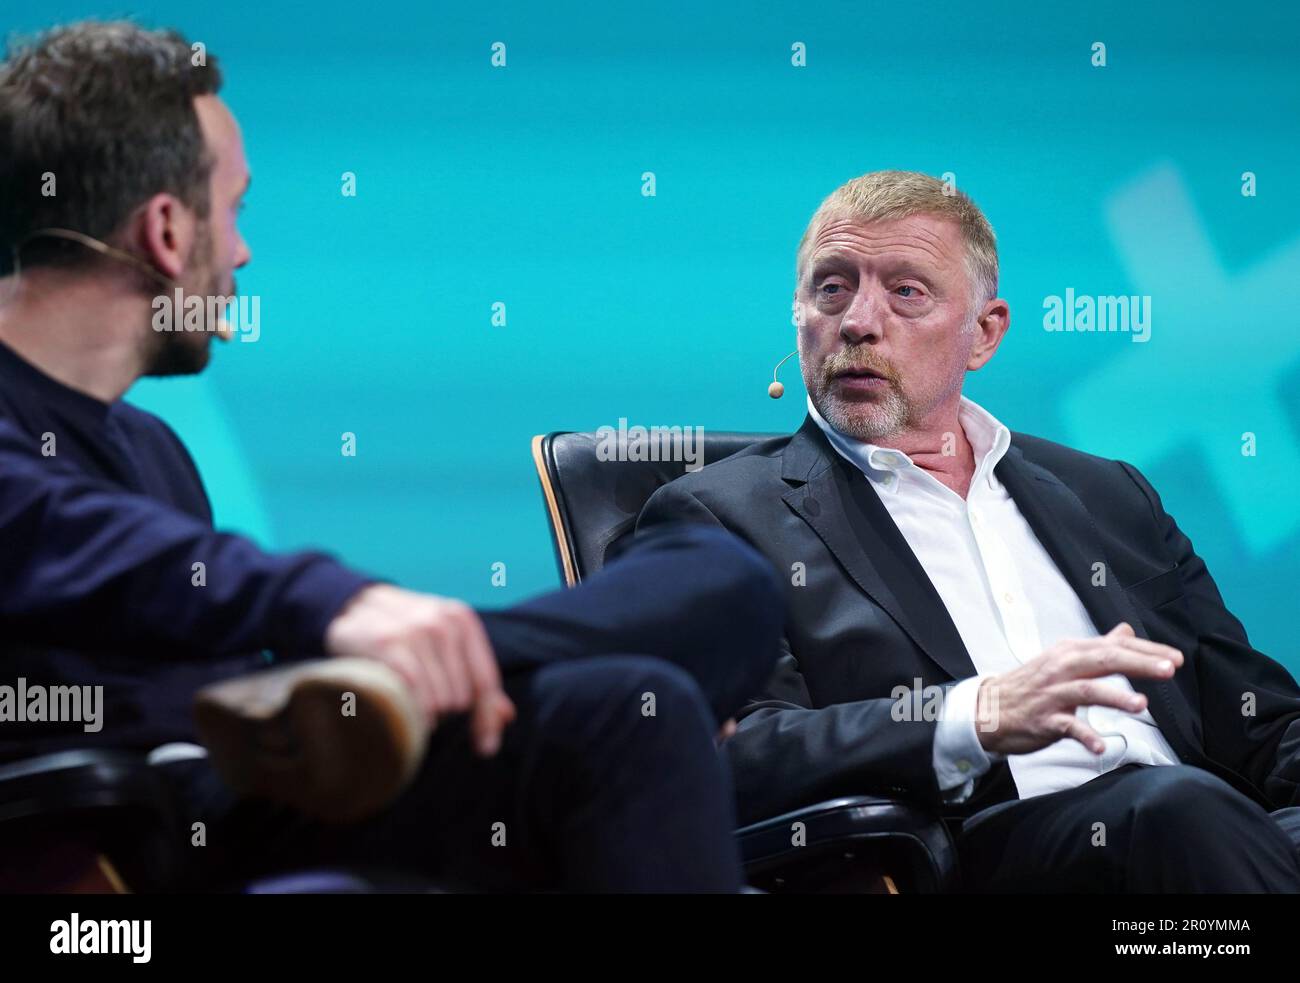 Hamburg, Germany. 10th May, 2023. Boris Becker (r), former tennis player, sits next to Philipp Westermeyer, OMR Managing Director, on stage at the OMR digital trade show in the exhibition halls. Around 70,000 visitors are expected to attend this year's OMR Festival in Hamburg. It is one of the largest marketing and digital conferences in Europe. Credit: Marcus Brandt/dpa/Alamy Live News Stock Photo